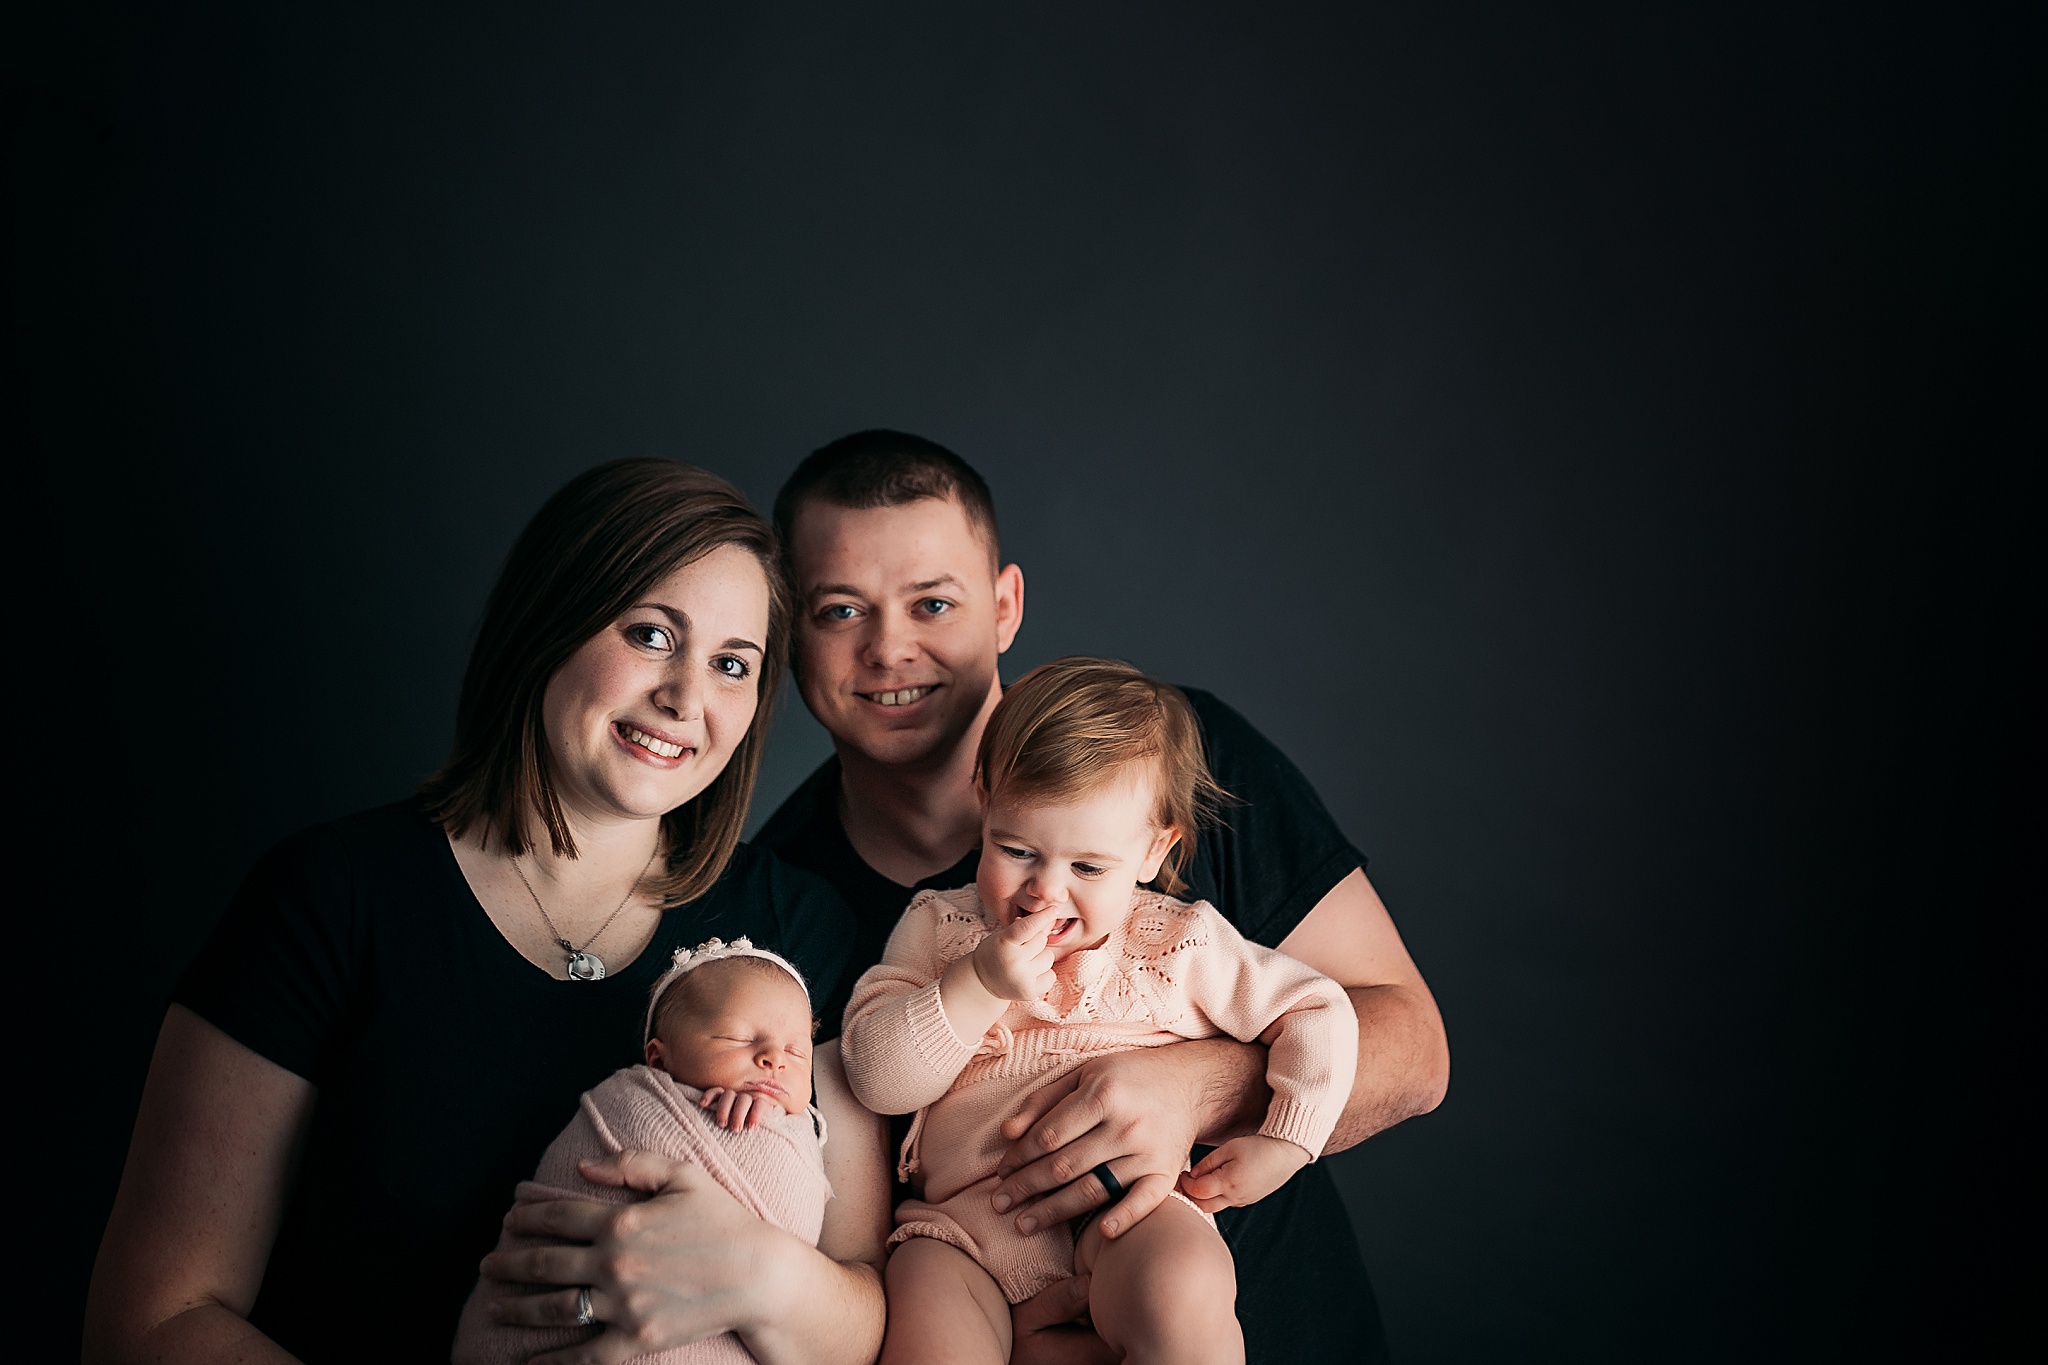 Family of 4 with newborn baby